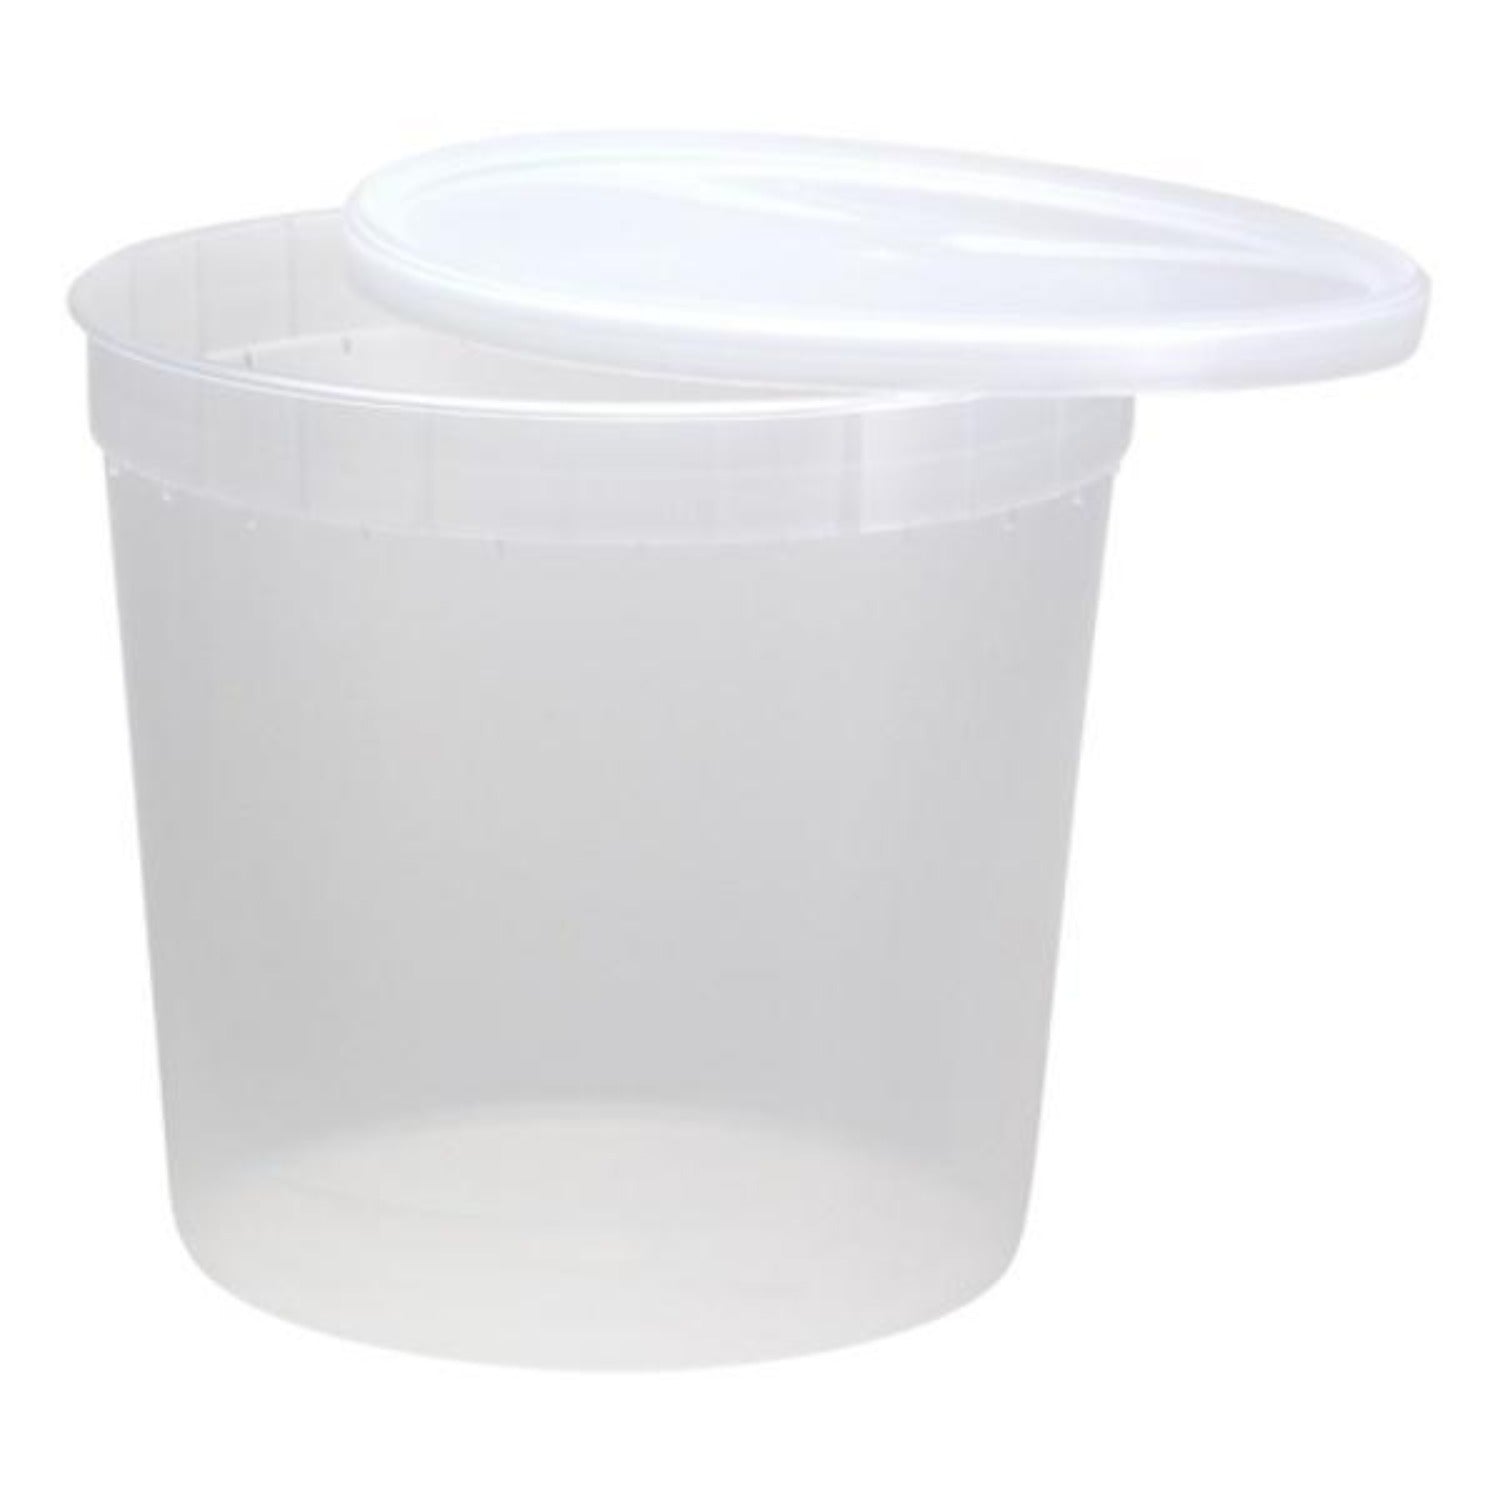 5 oz Deli Cup with Lid